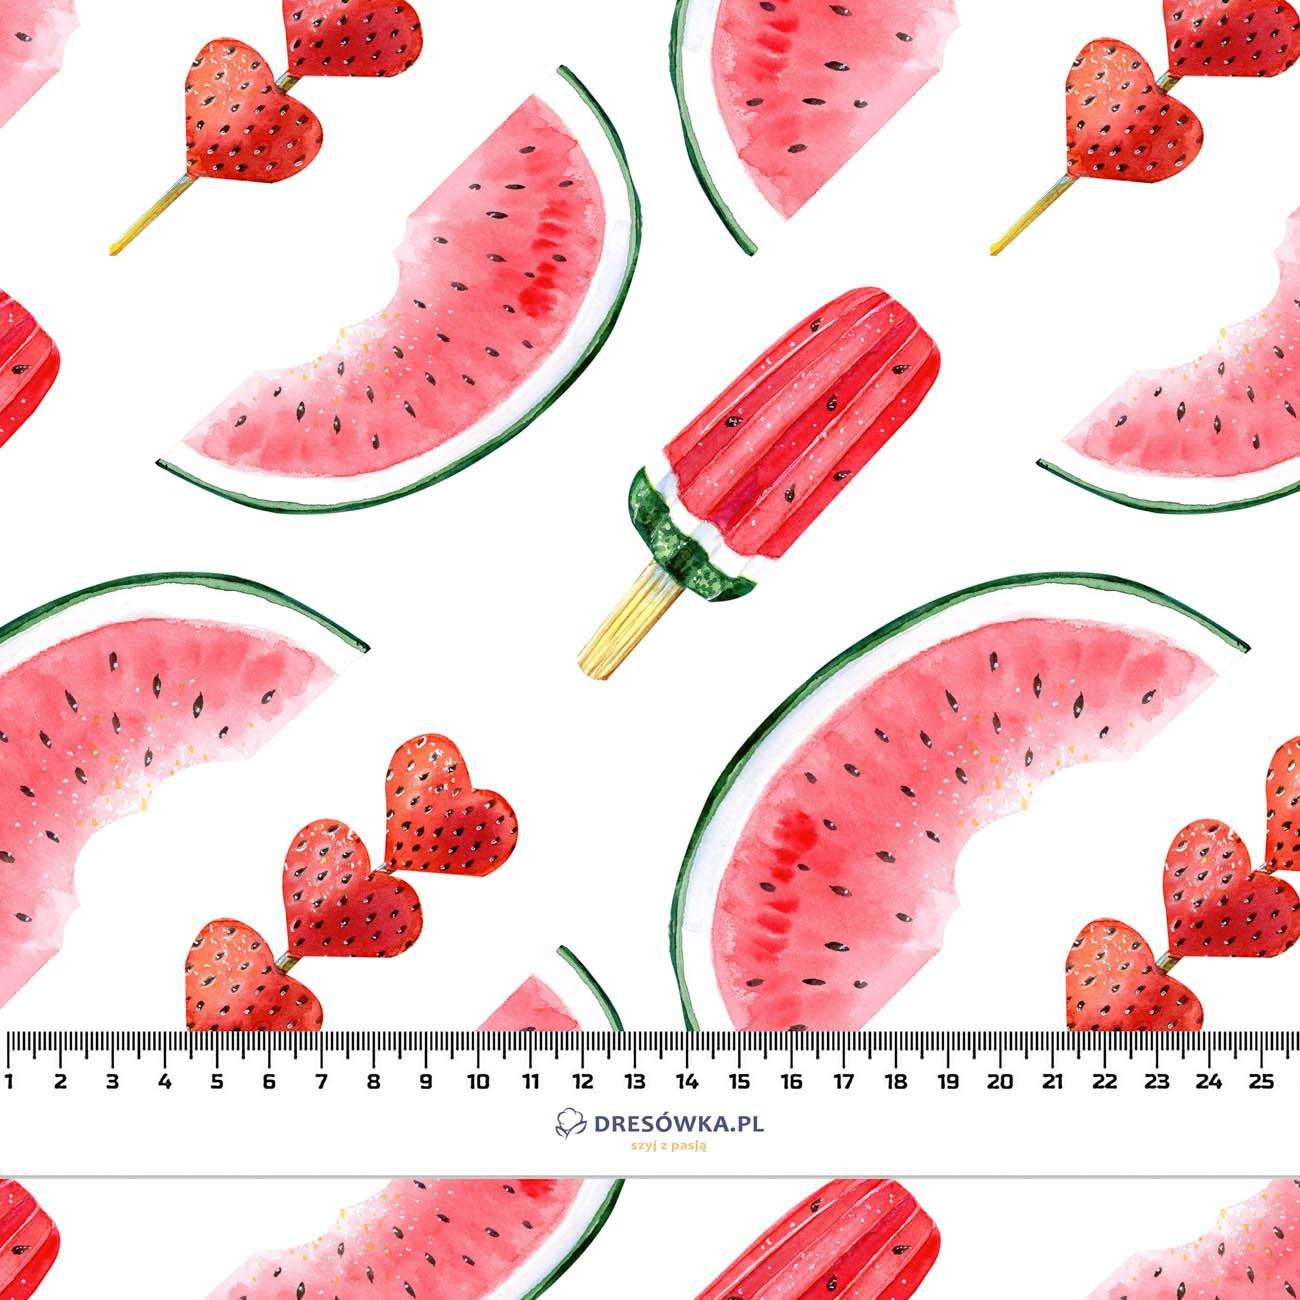 ICE CREAM AND WATERMELONS - Cotton woven fabric